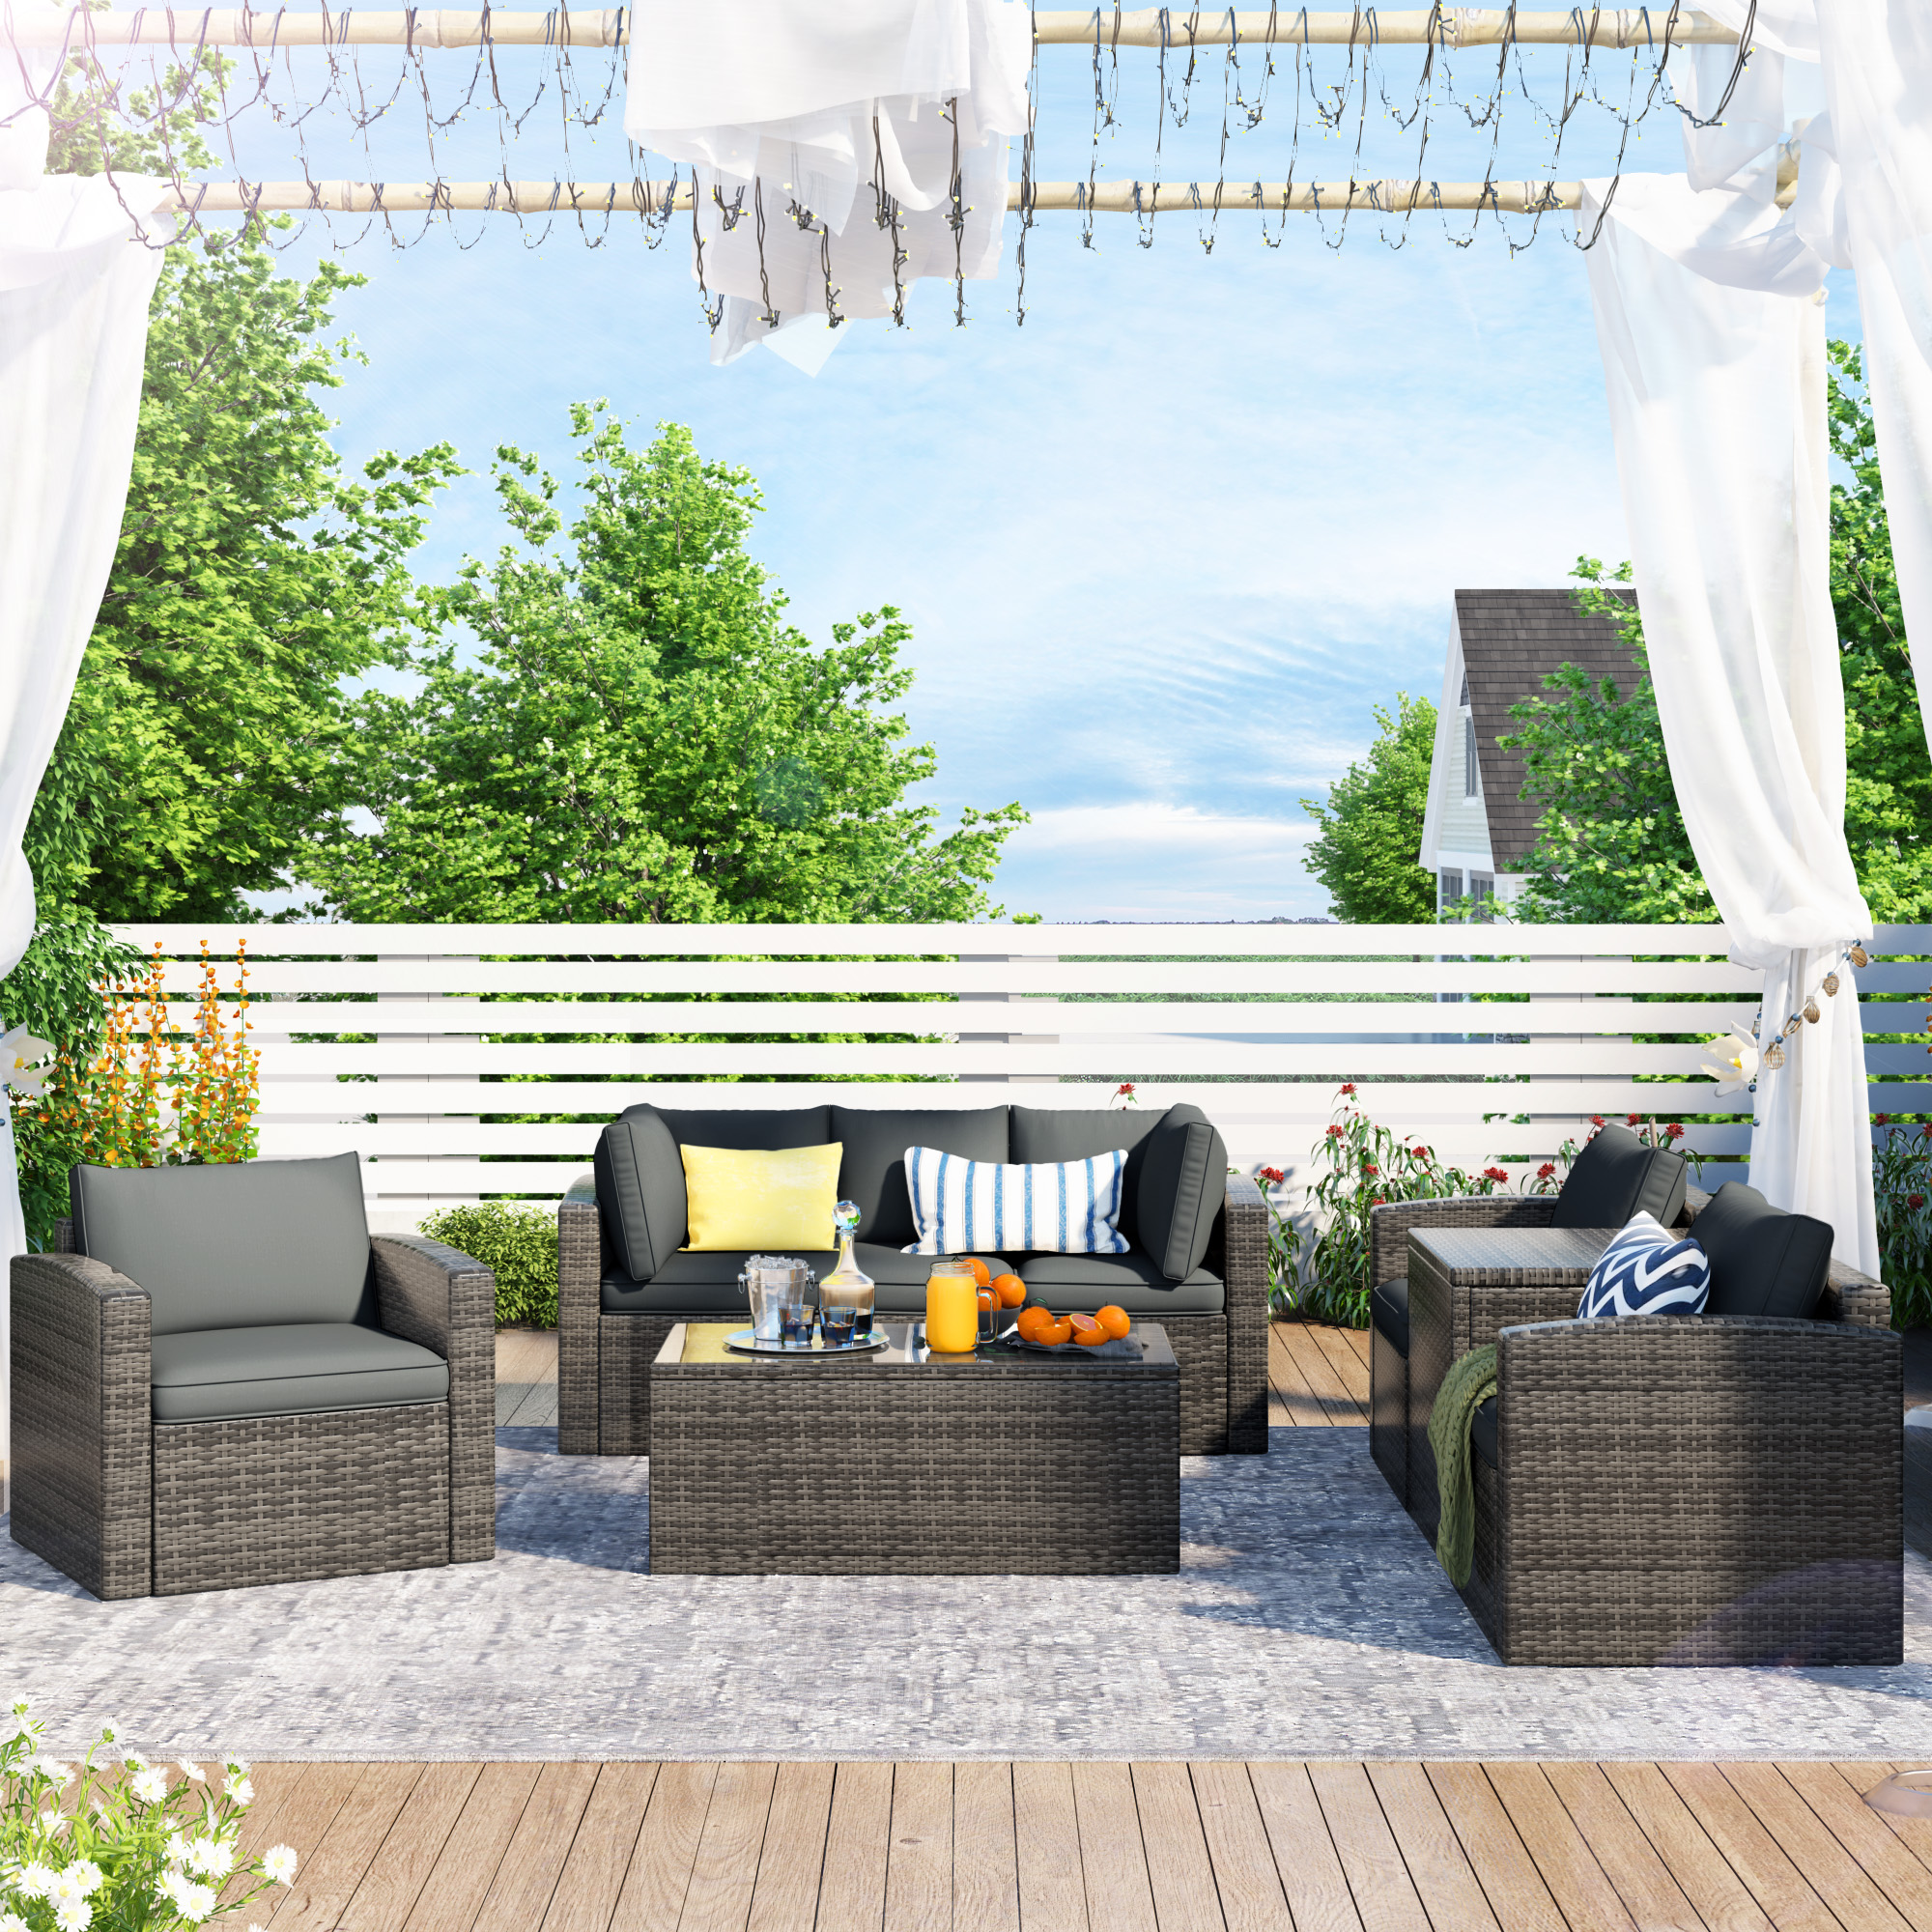 U_STYLE Patio Furniture Sets, 7-Piece Patio Wicker Sofa , Cushions, Chairs , a Loveseat , a Table and a Storage Box-CASAINC